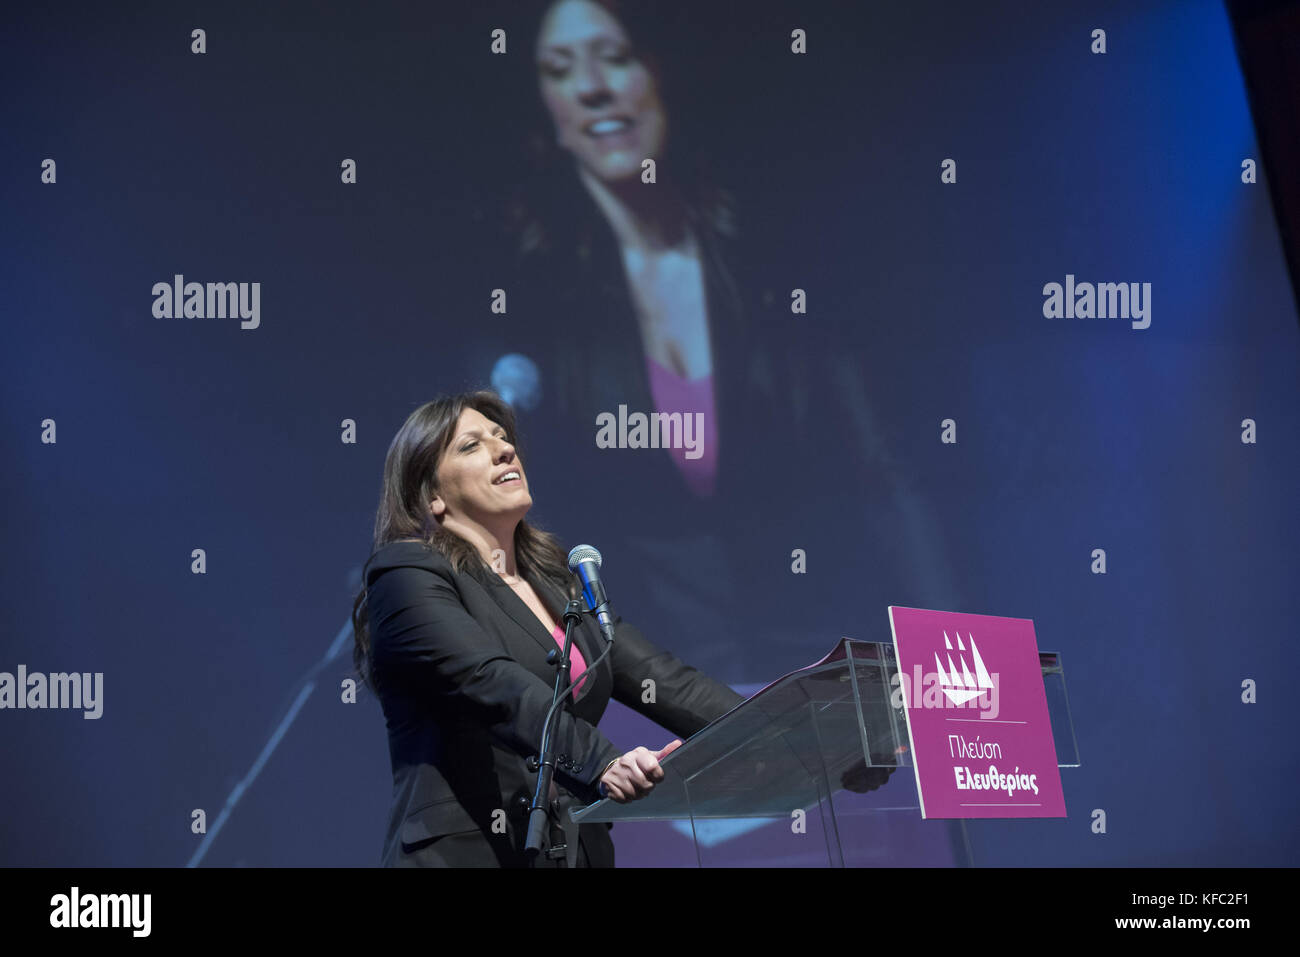 Athens, Greece. 27th Oct, 2017. ZOE KONSTANTOPOULOU addresses participants during the opening of her party's, Plefsi Eleftherias, conference. Plefsi Eleftherias, meaning Sail of Freedom, was formed by governing party Syriza's dissident and former president of the Greek parliament, Zoe Konstantopoulou. Credit: Nikolas Georgiou/ZUMA Wire/Alamy Live News Stock Photo